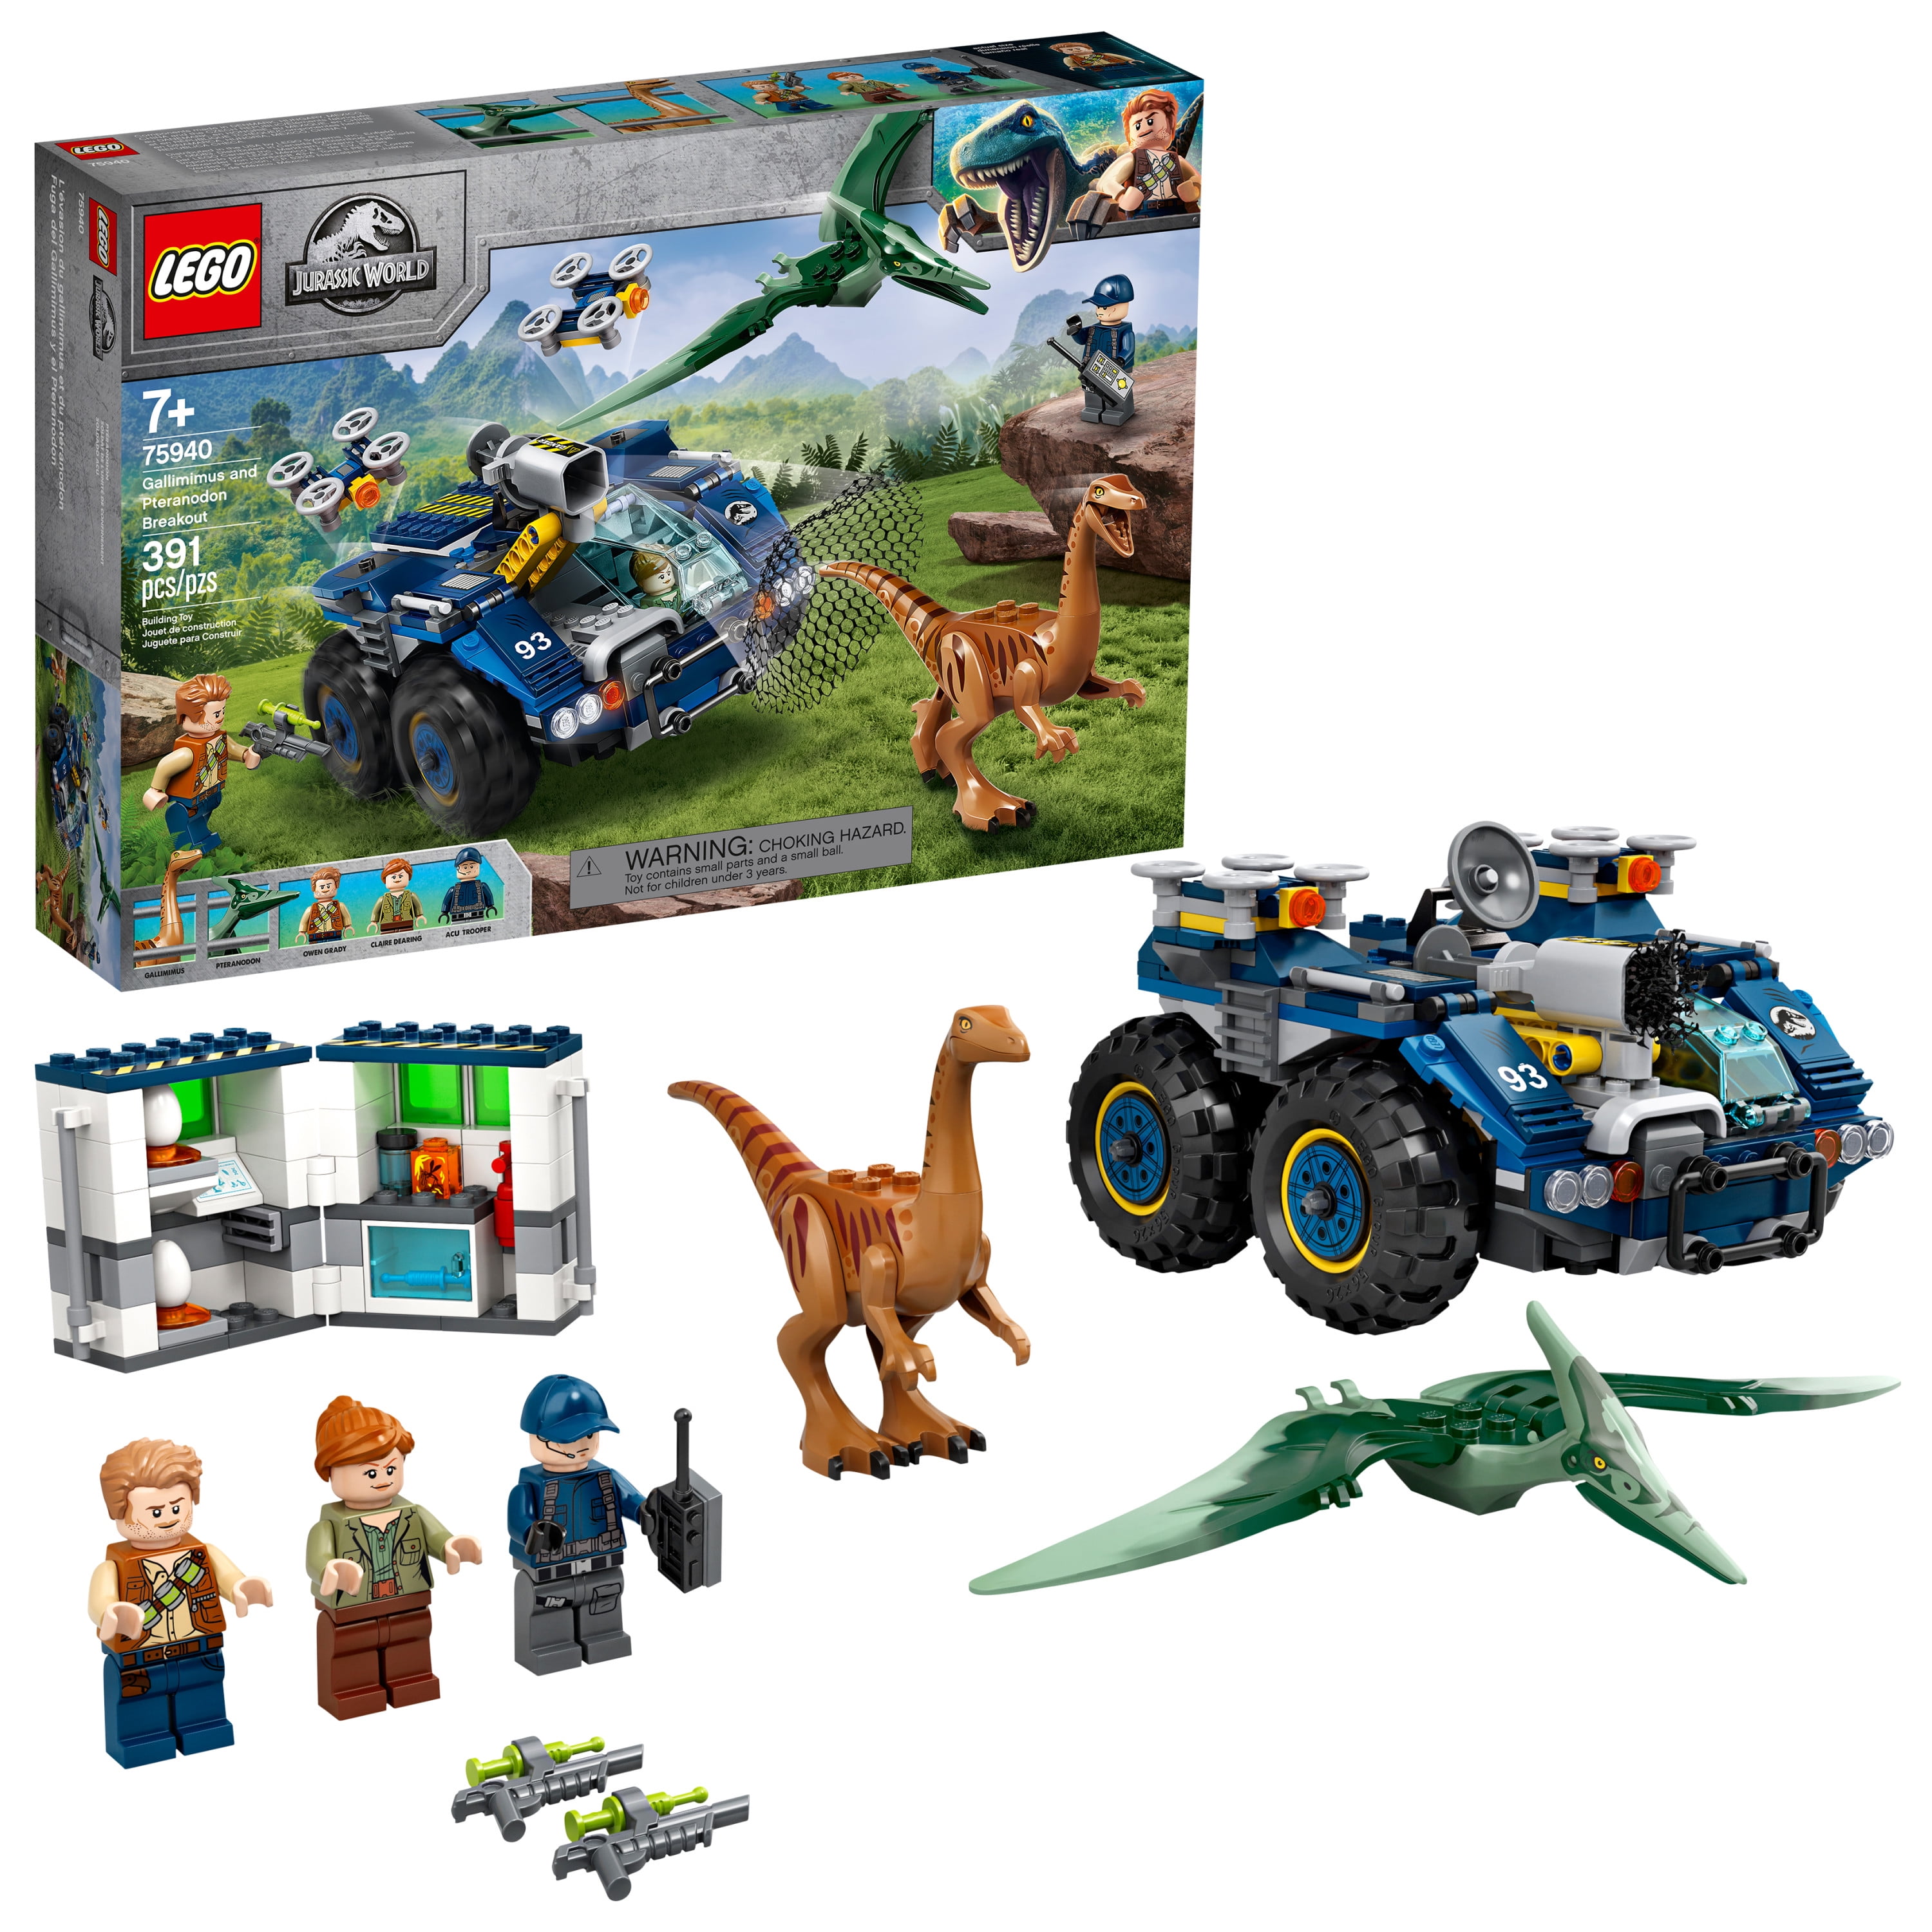 LEGO Jurassic World Gallimimus and Pteranodon Breakout 75940 Building Set  (391 Pieces) 